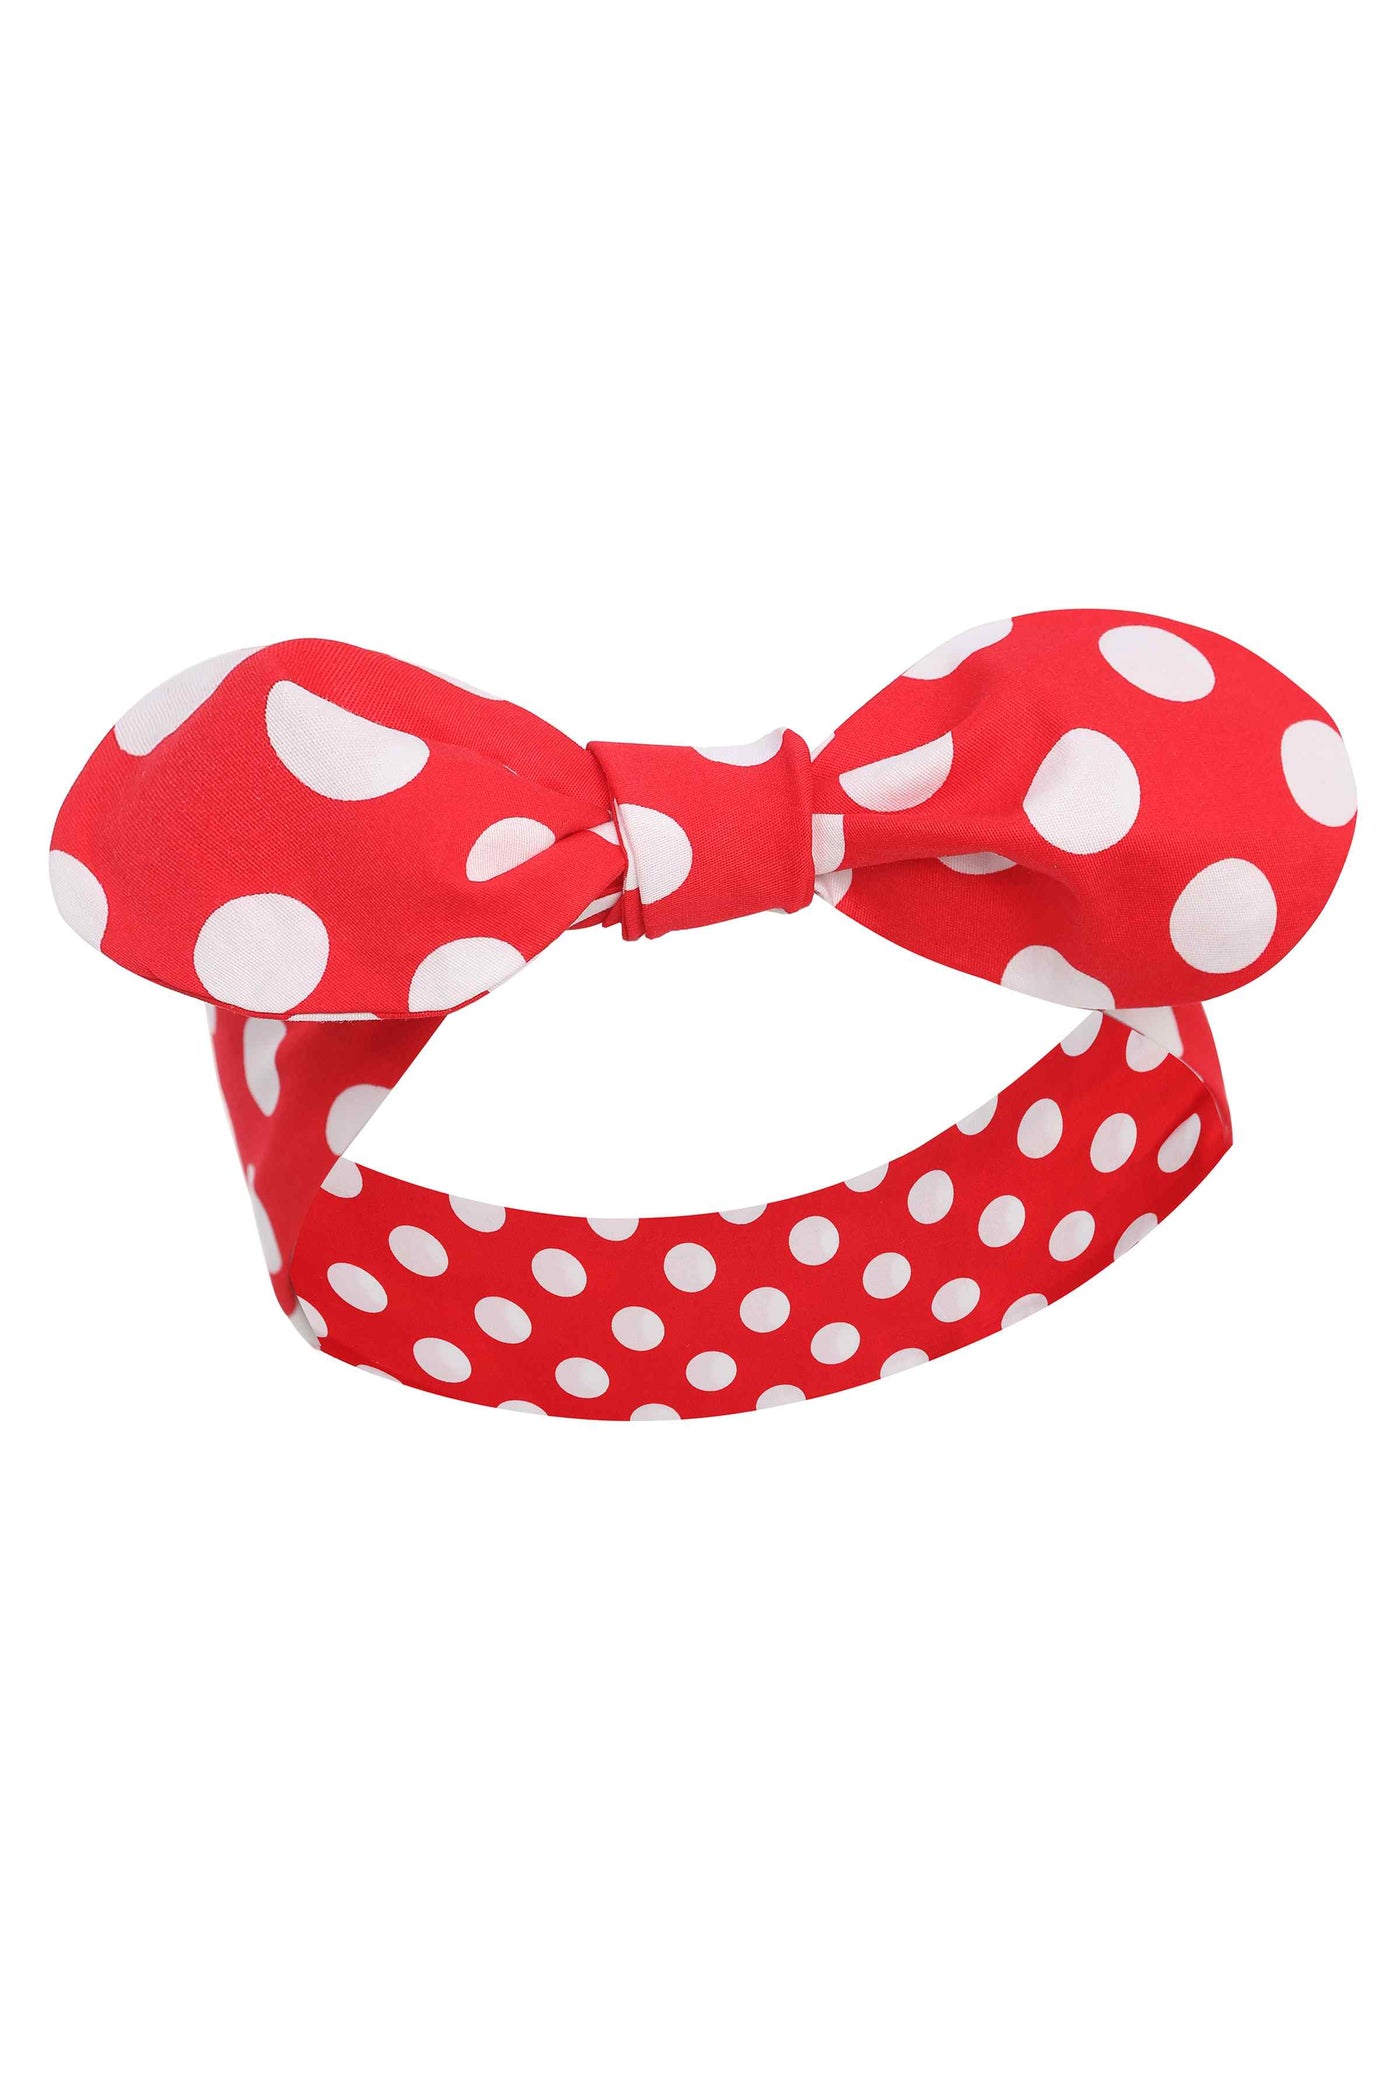 Tie Knot Headband In Red and White Polka Dots